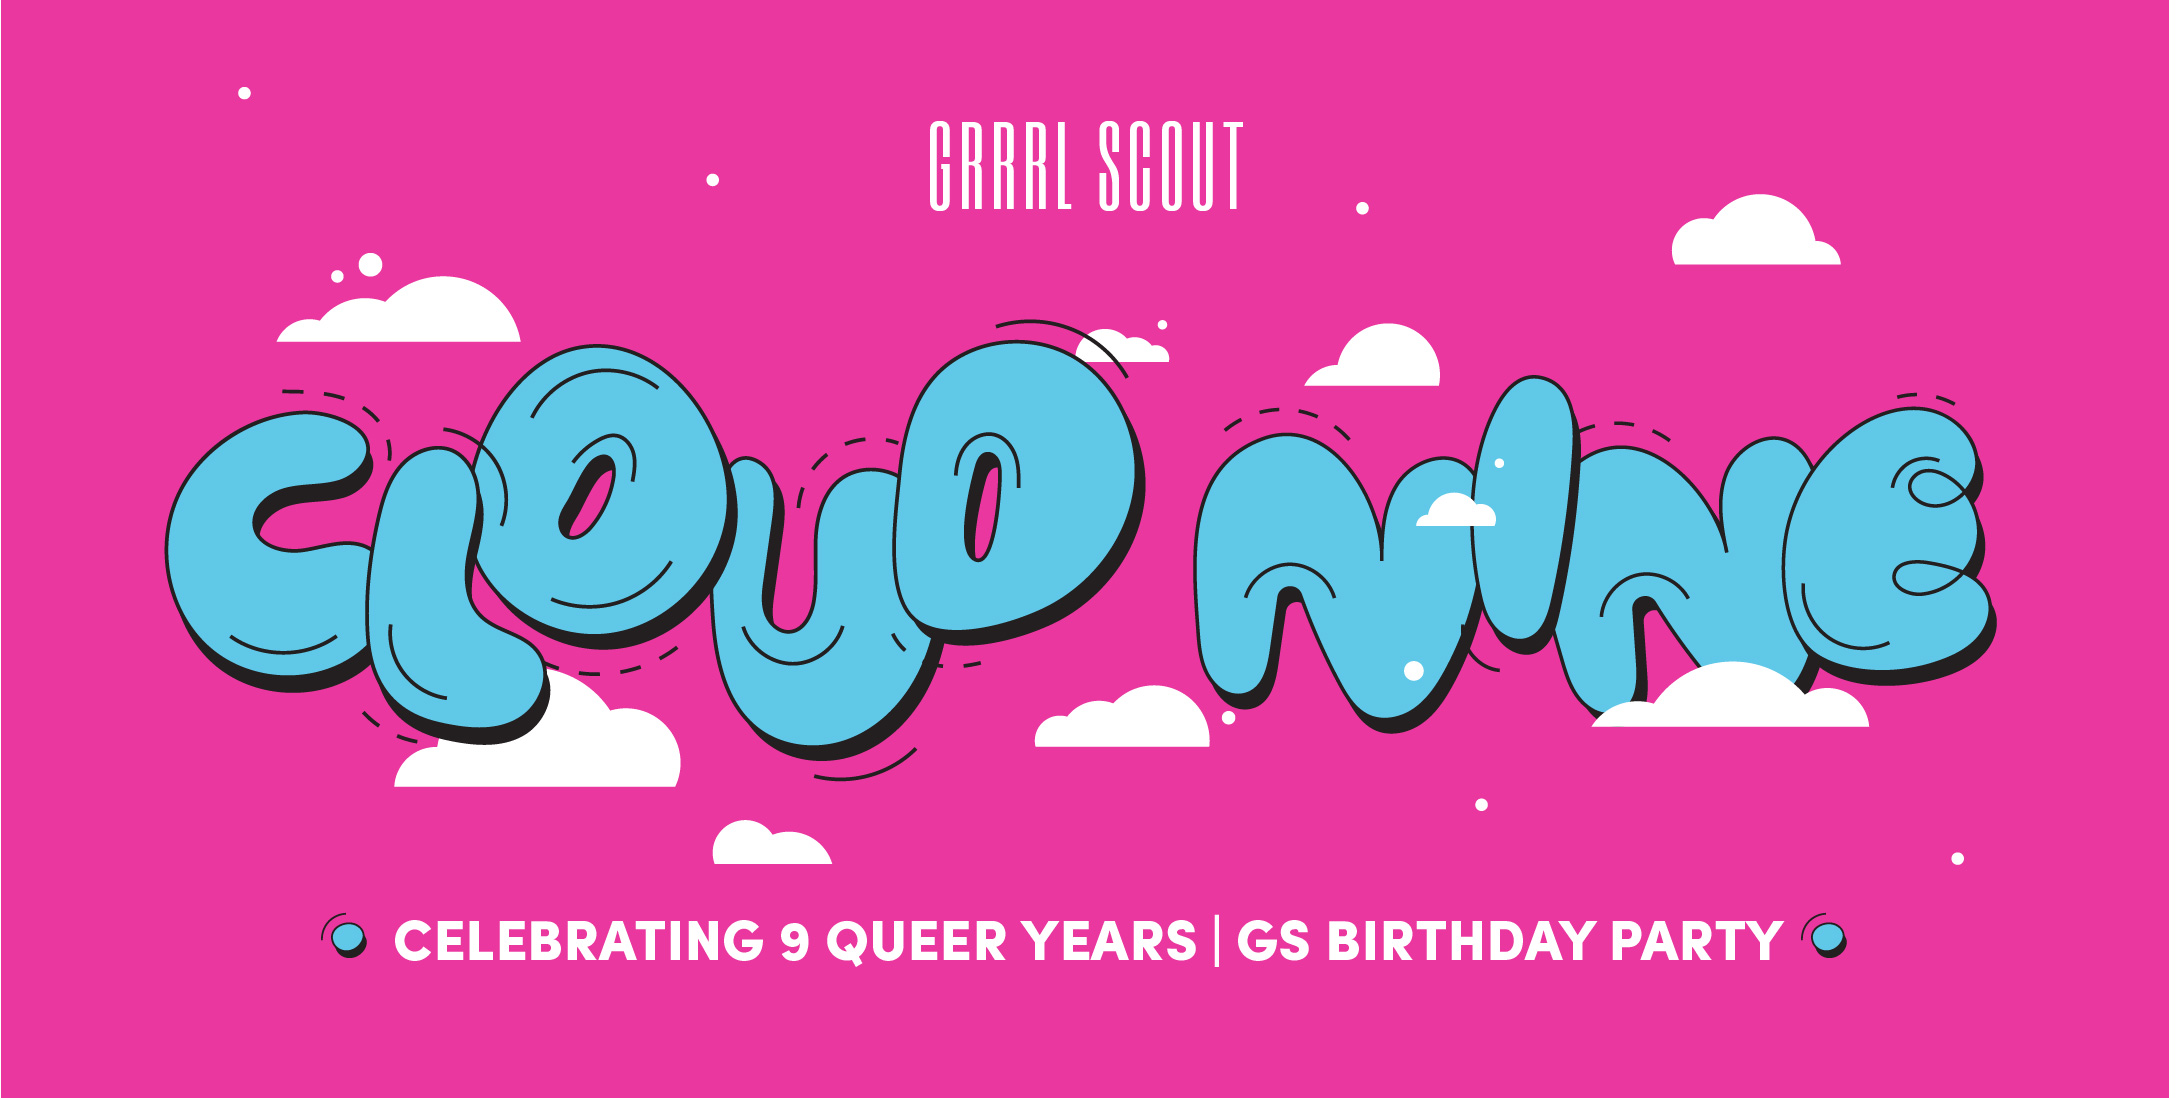 GRRRL SCOUT: November Queer Dance Party November 12, 2022 The Hook and Ladder Theater Doors 9:30pm - 1am :: 21+ General Admission*: $10 Early / $14 Advance / $20 Day of Show *Note: Additional fees may apply ENTRANCE: Glassdoor on the Northside ally of the building. Music: Dj Izzie P Mission Room: TBD Special Guest: Meownsota and Coffē